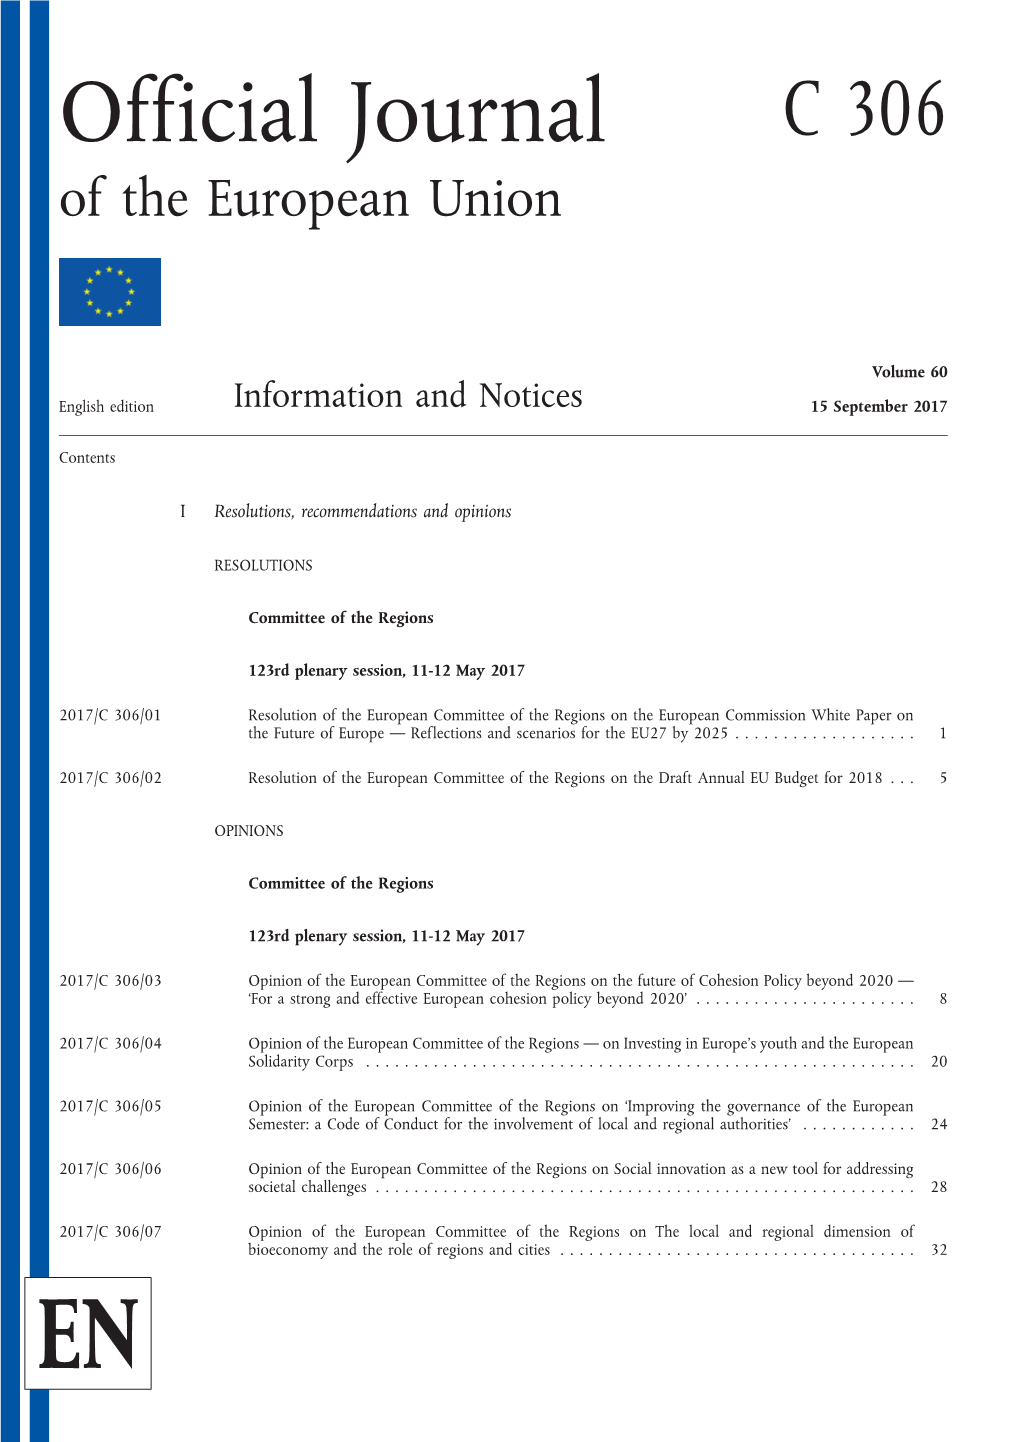 Official Journal of the European Union C 306/1